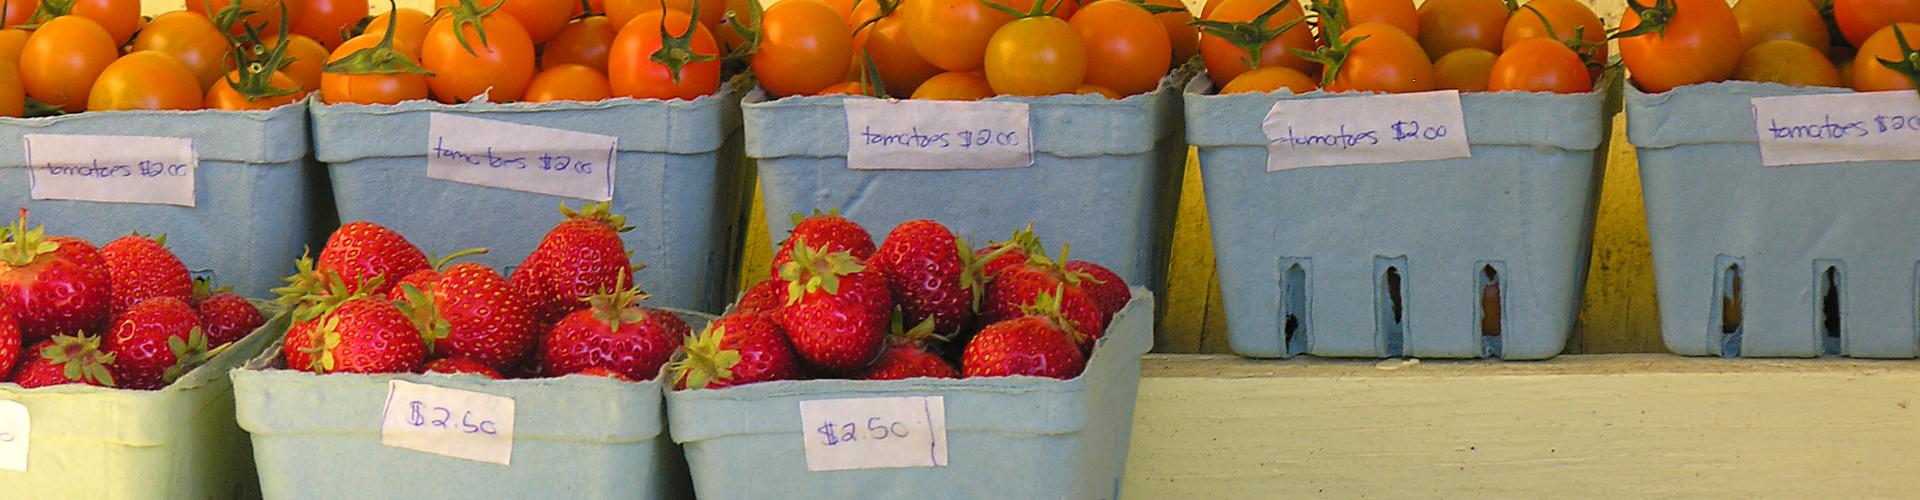 Local fresh produce for sale